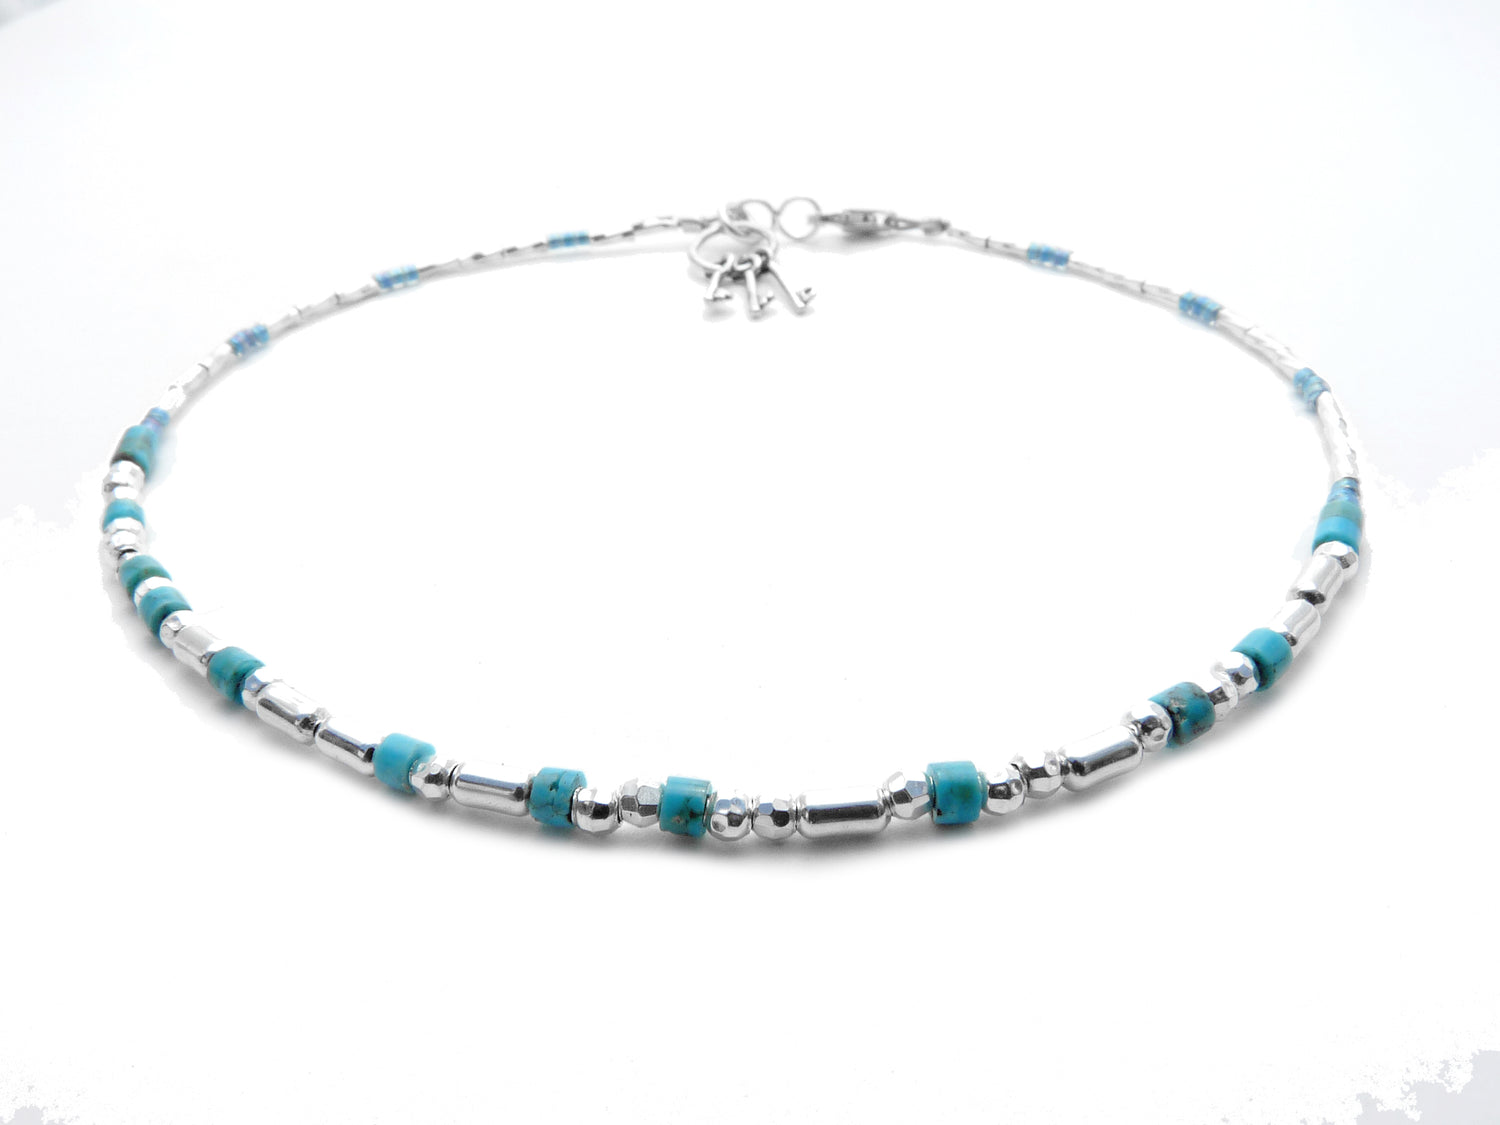 Morse Code Anklet in Silver, The Key is Willingness, Custom Words Accepted, Secret Message